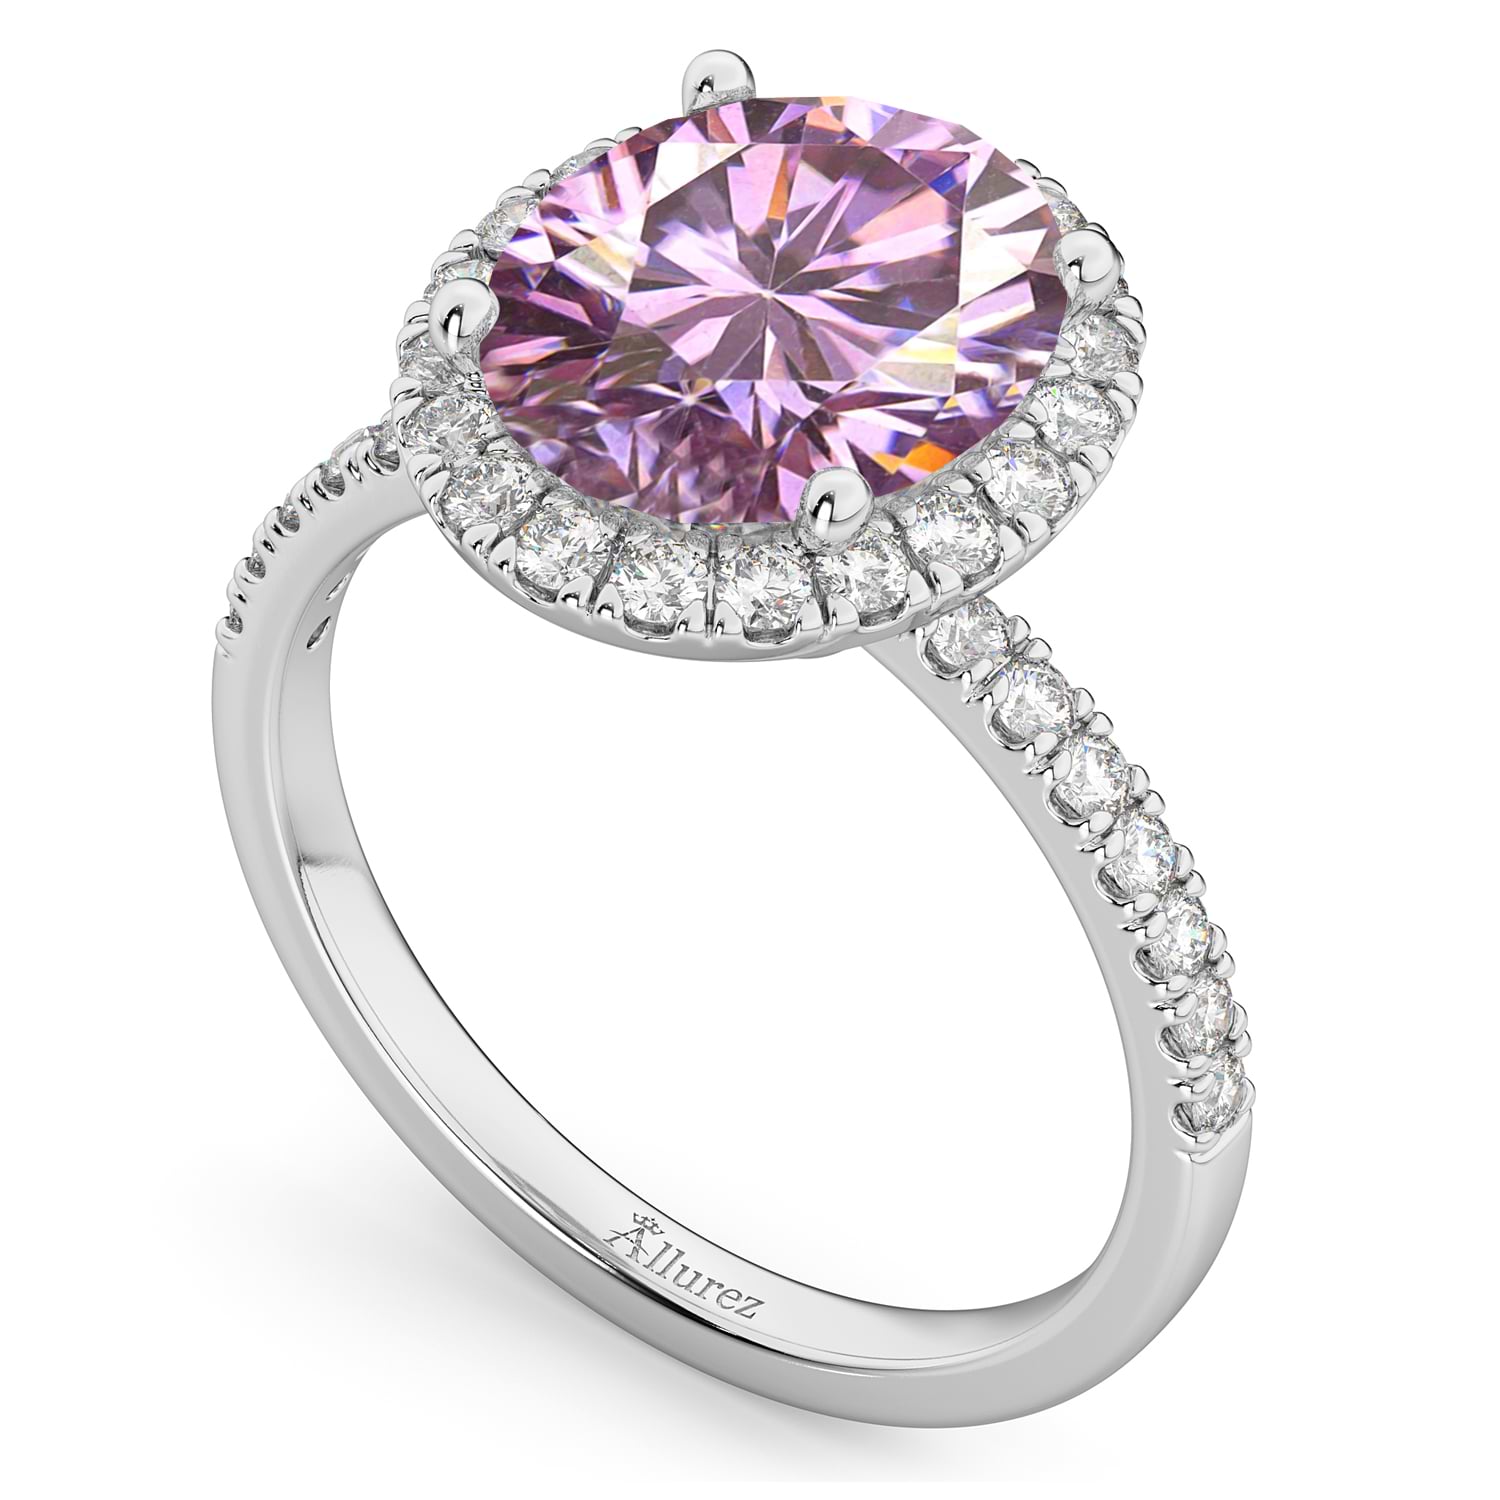 Oval Cut Halo Pink Moissanite & Diamond Engagement Ring 14K White Gold 2.72ct